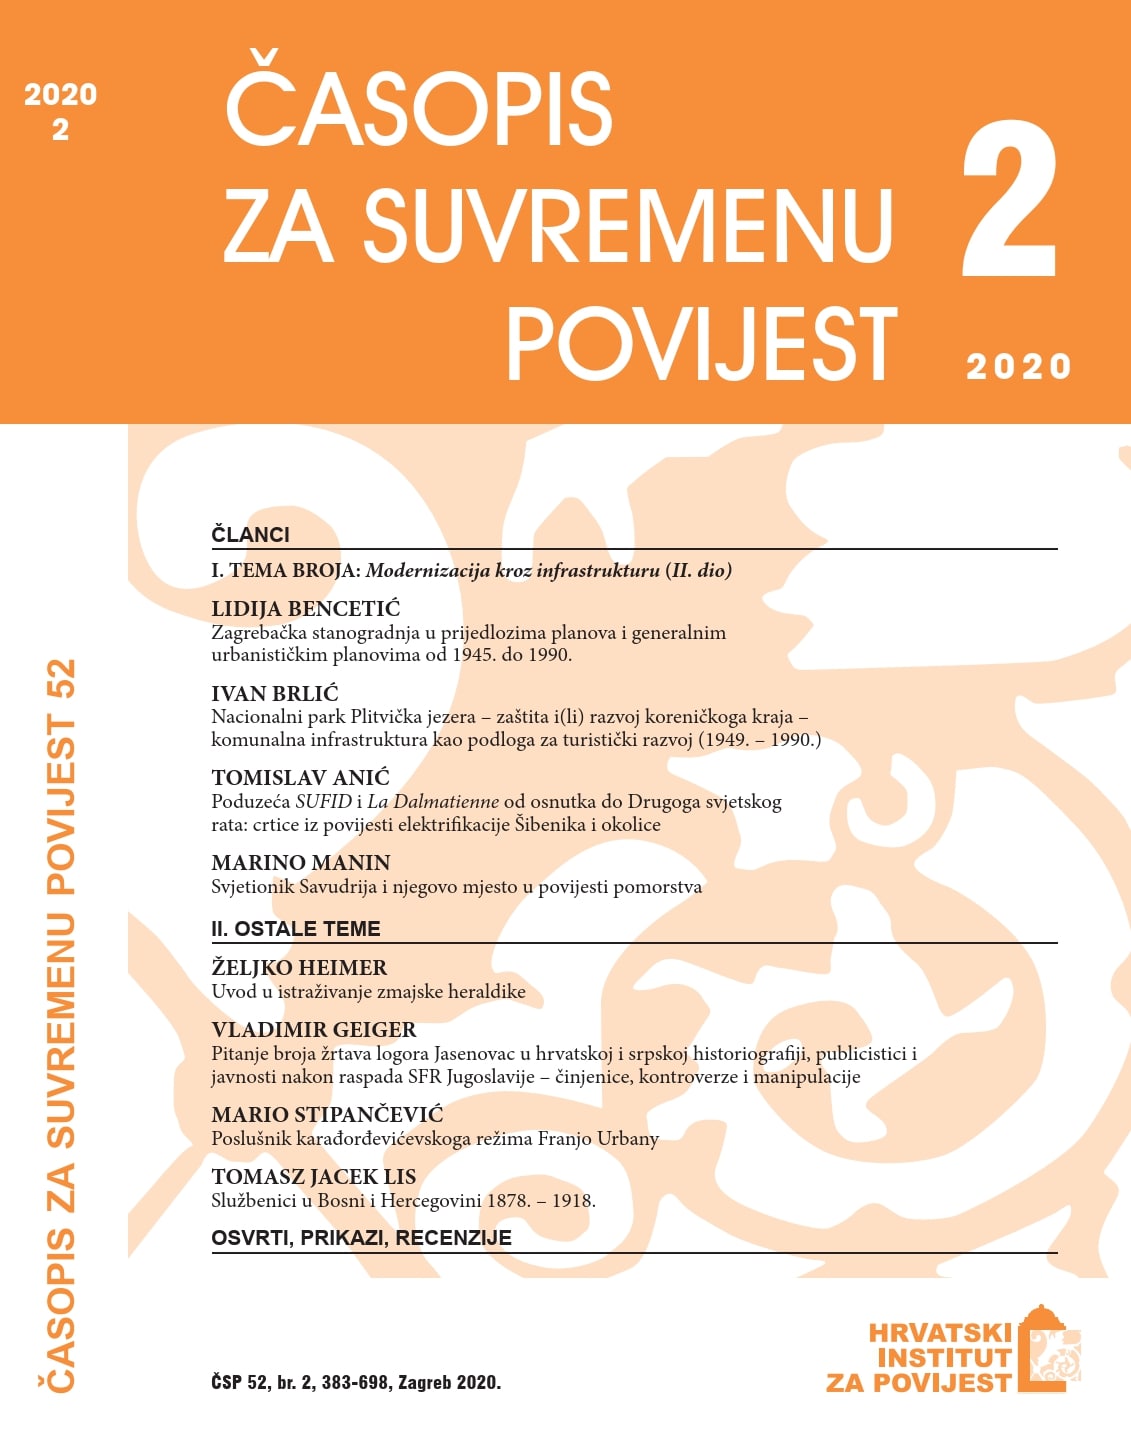 The Issue of the Number of Jasenovac Camp Victims in Croatian and Serbian Historiography, Opinion Journalism, and Public Discourse after the Disintegration of the Socialist Federal Republic of Yugoslavia – Facts, Controversies, and Manipulations